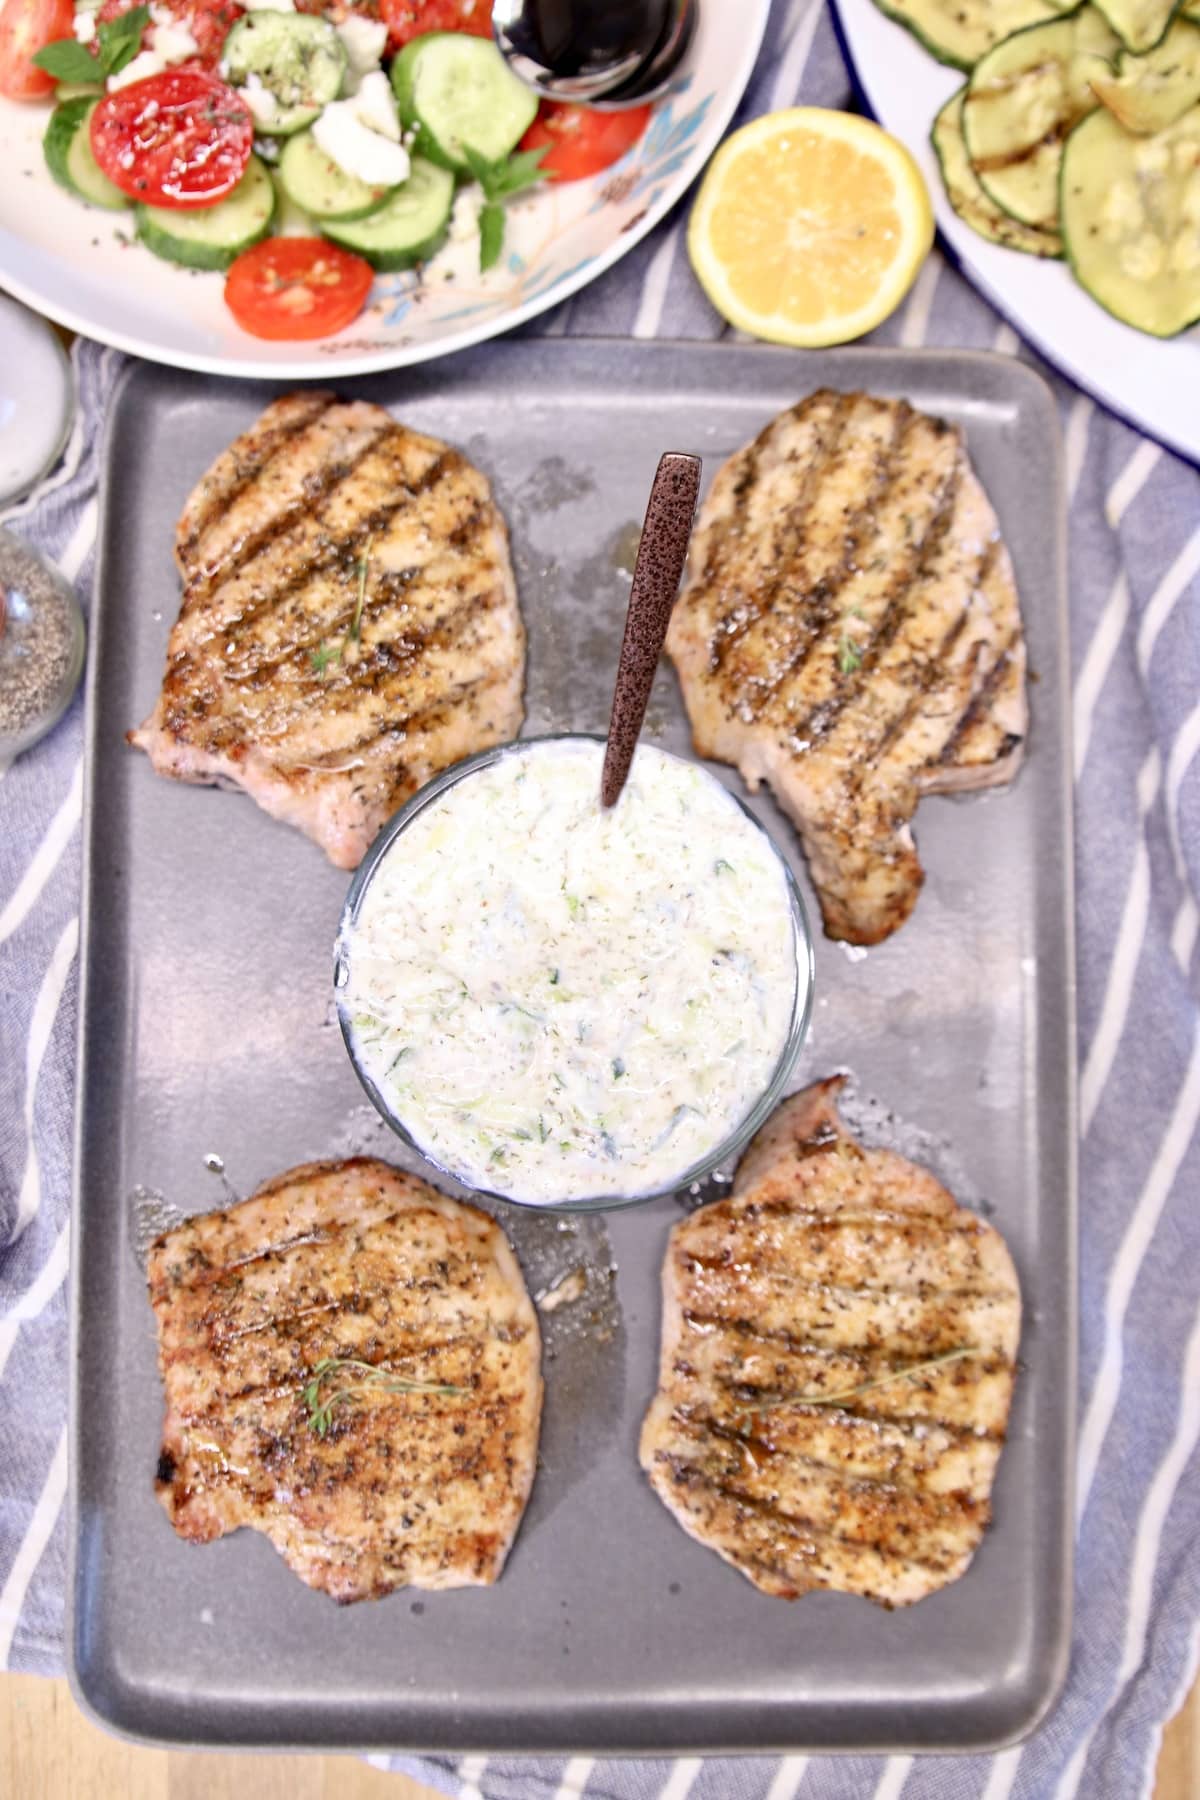 Grilled pork chops on a platter with tzatziki sauce.